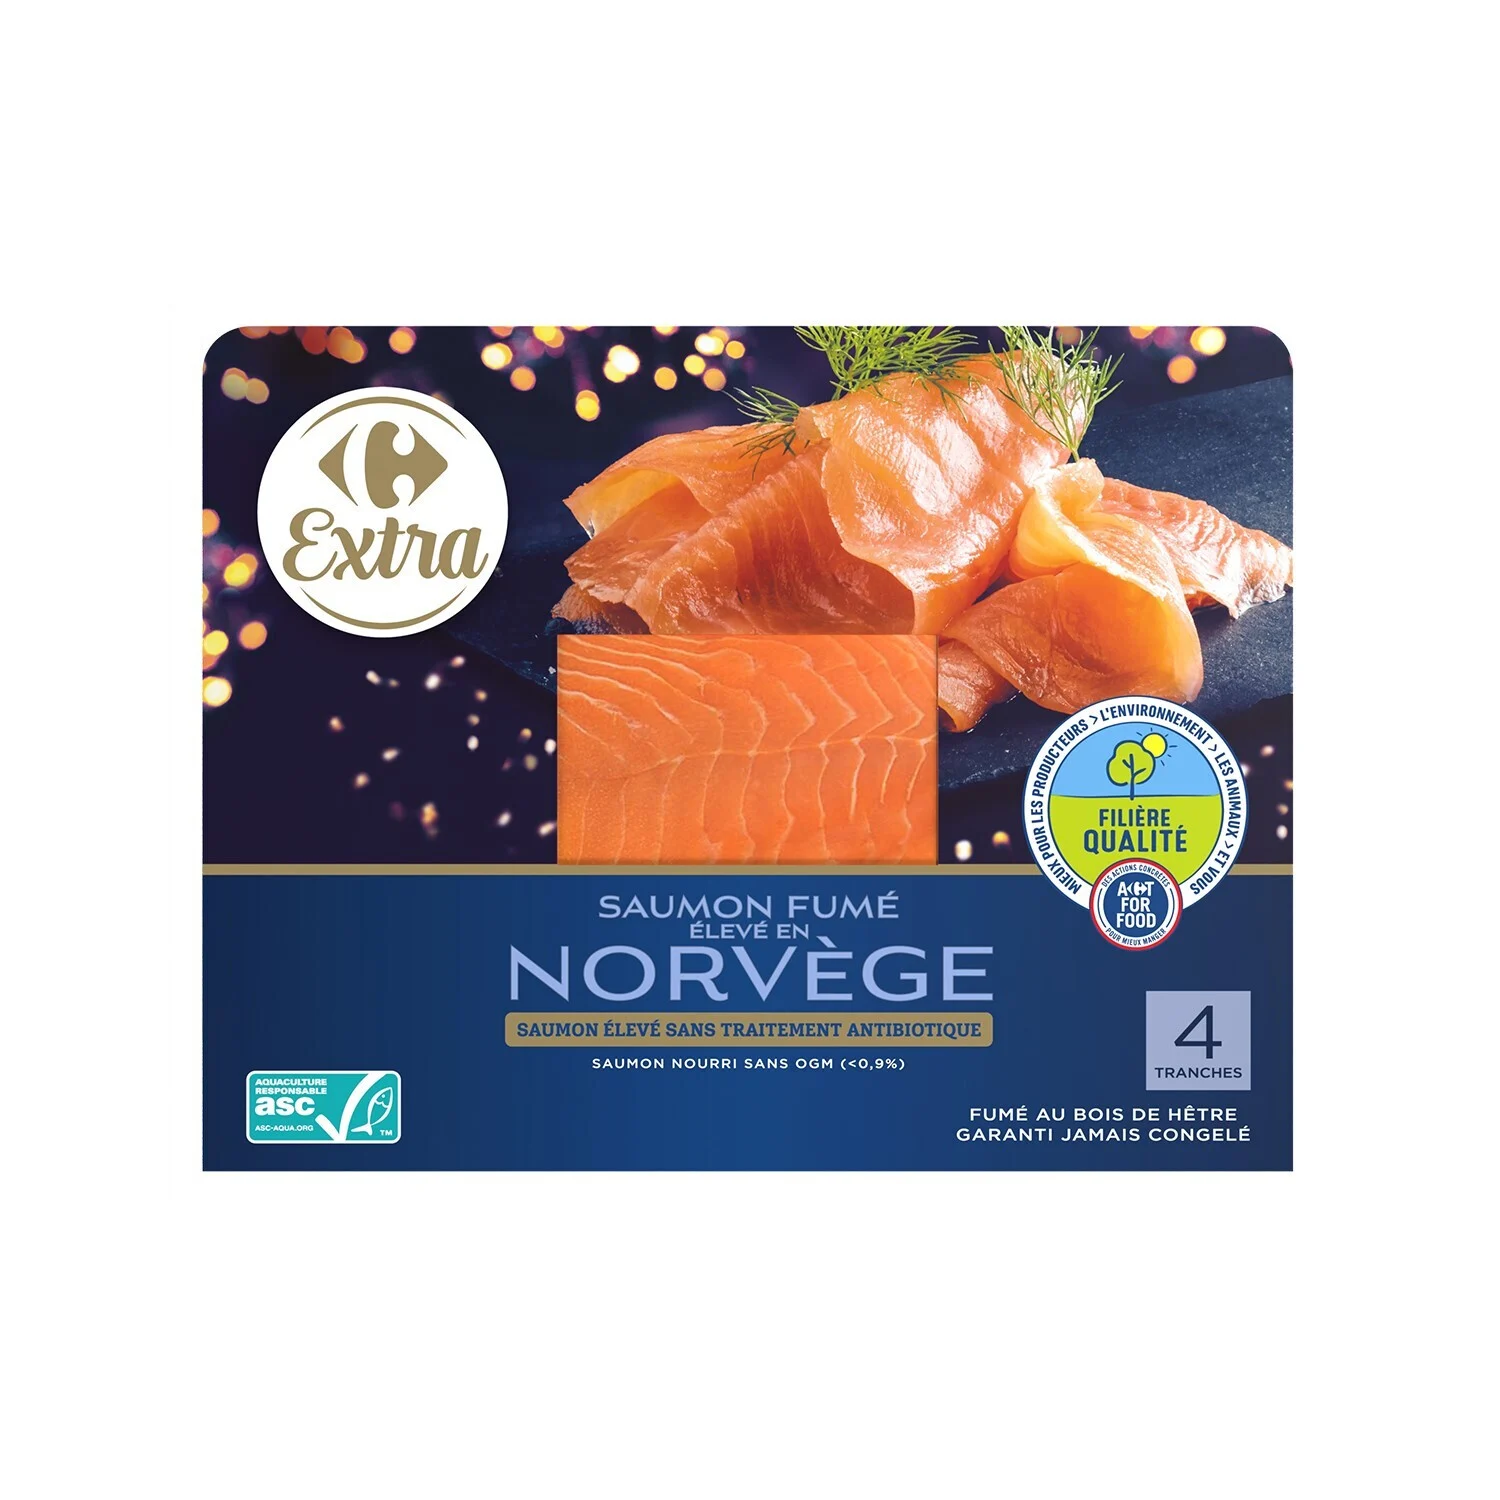 Carrefour or Auchan Smoked Salmon from Norway x4 slices 140g